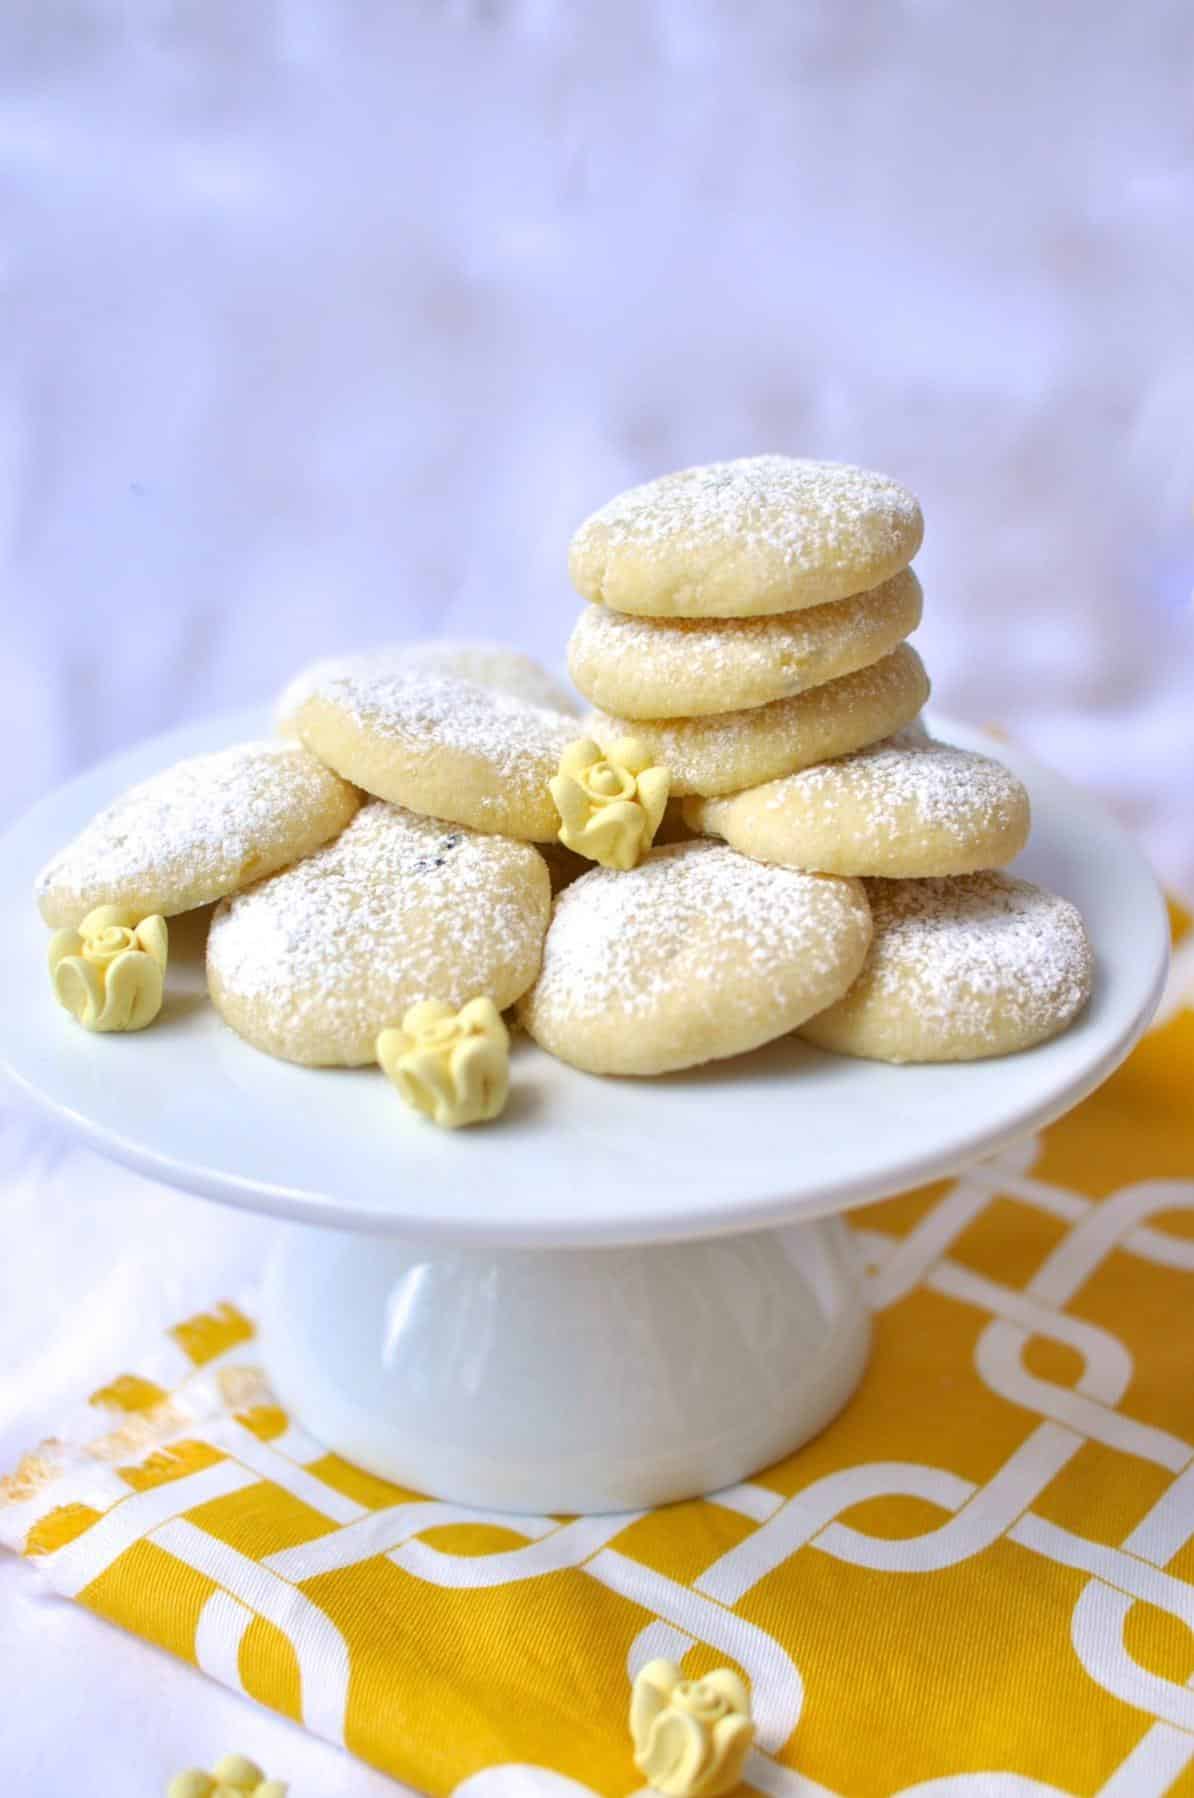  A little tropical twist on classic shortbread cookies.